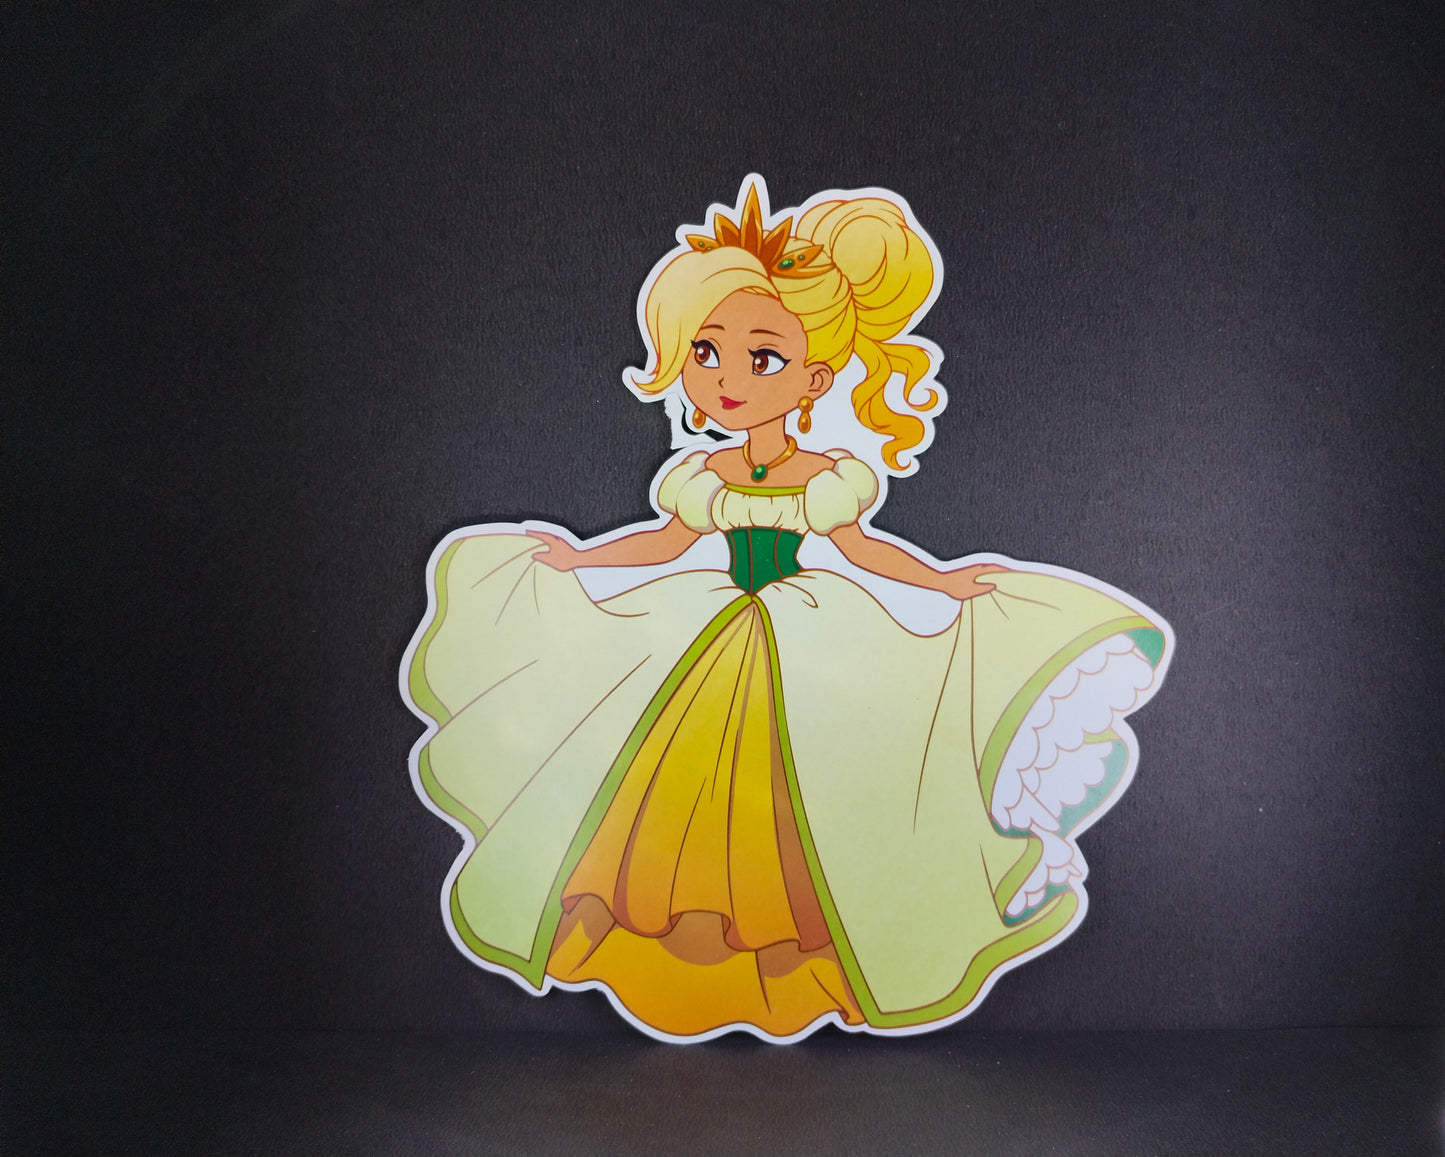 Birthday Decoration Kit - Princess Theme for Simple Birthday Decorations at Home